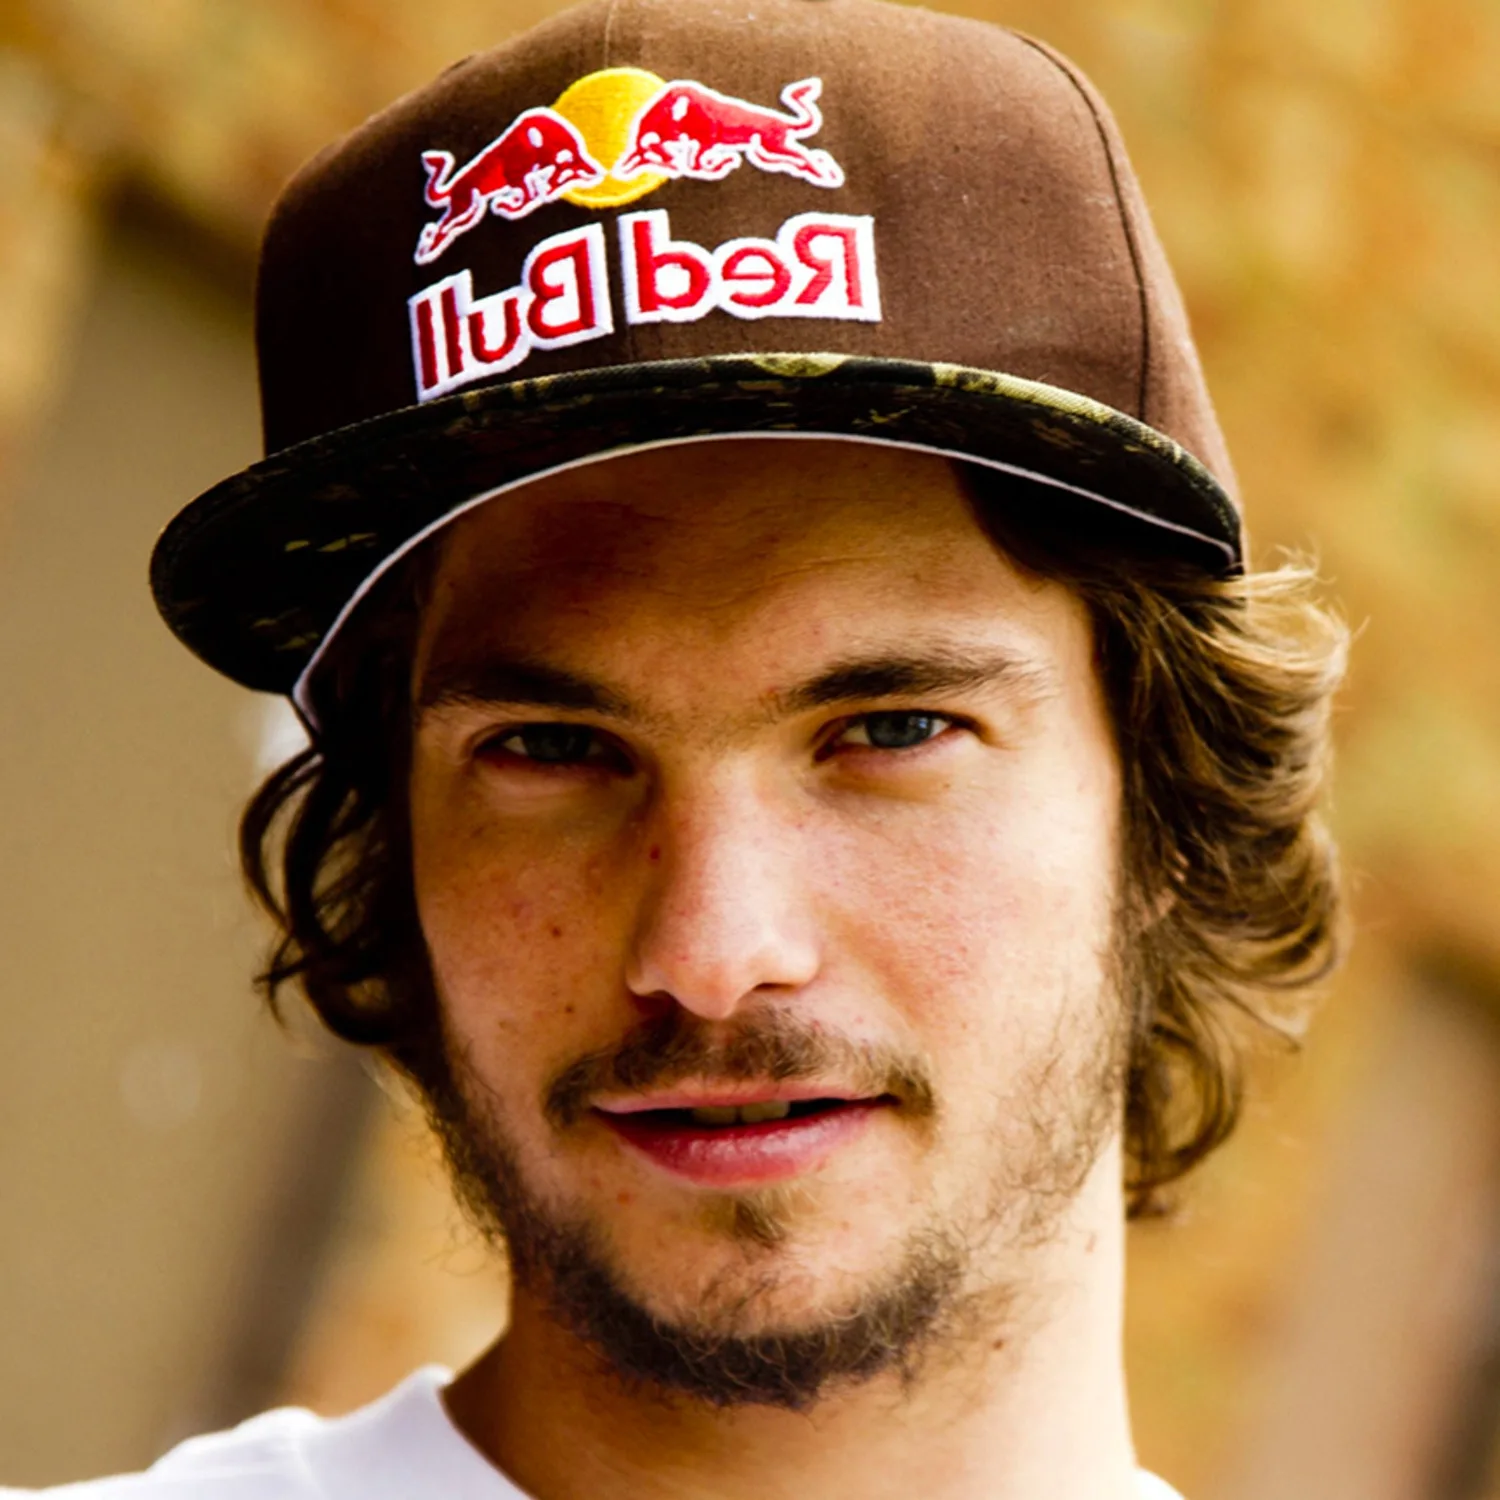 Torey Pudwill